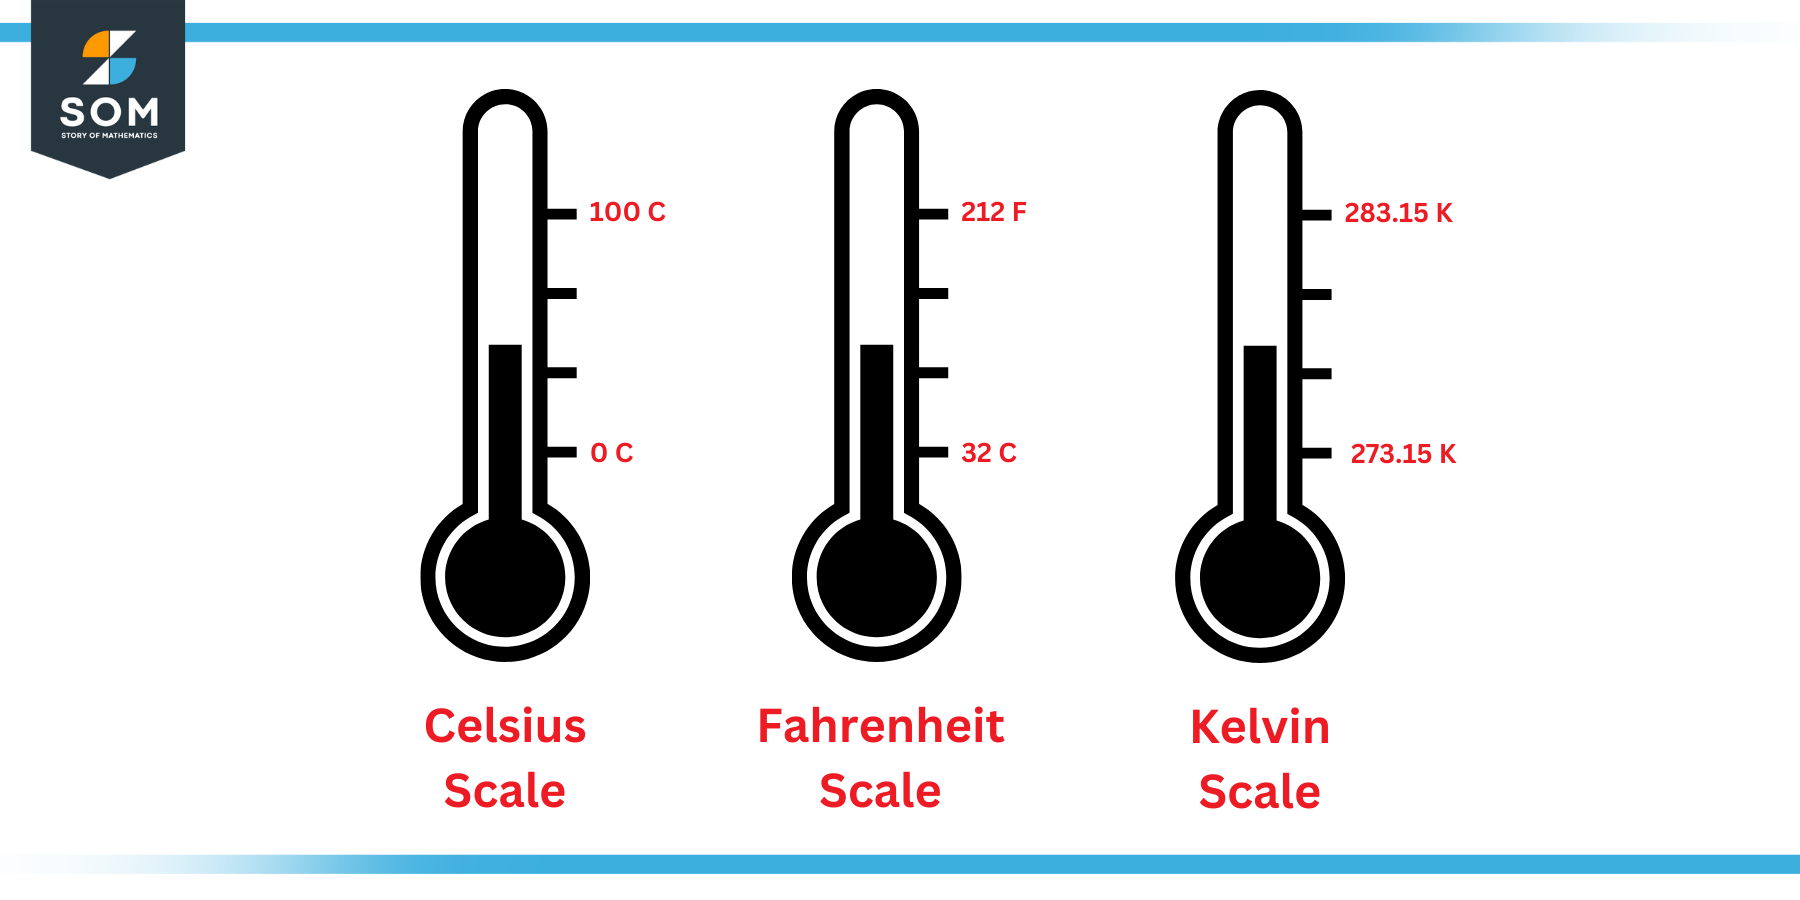 https://www.storyofmathematics.com/wp-content/uploads/2022/12/Celsius-Fahrenheit-and-Kelvin-scales.png